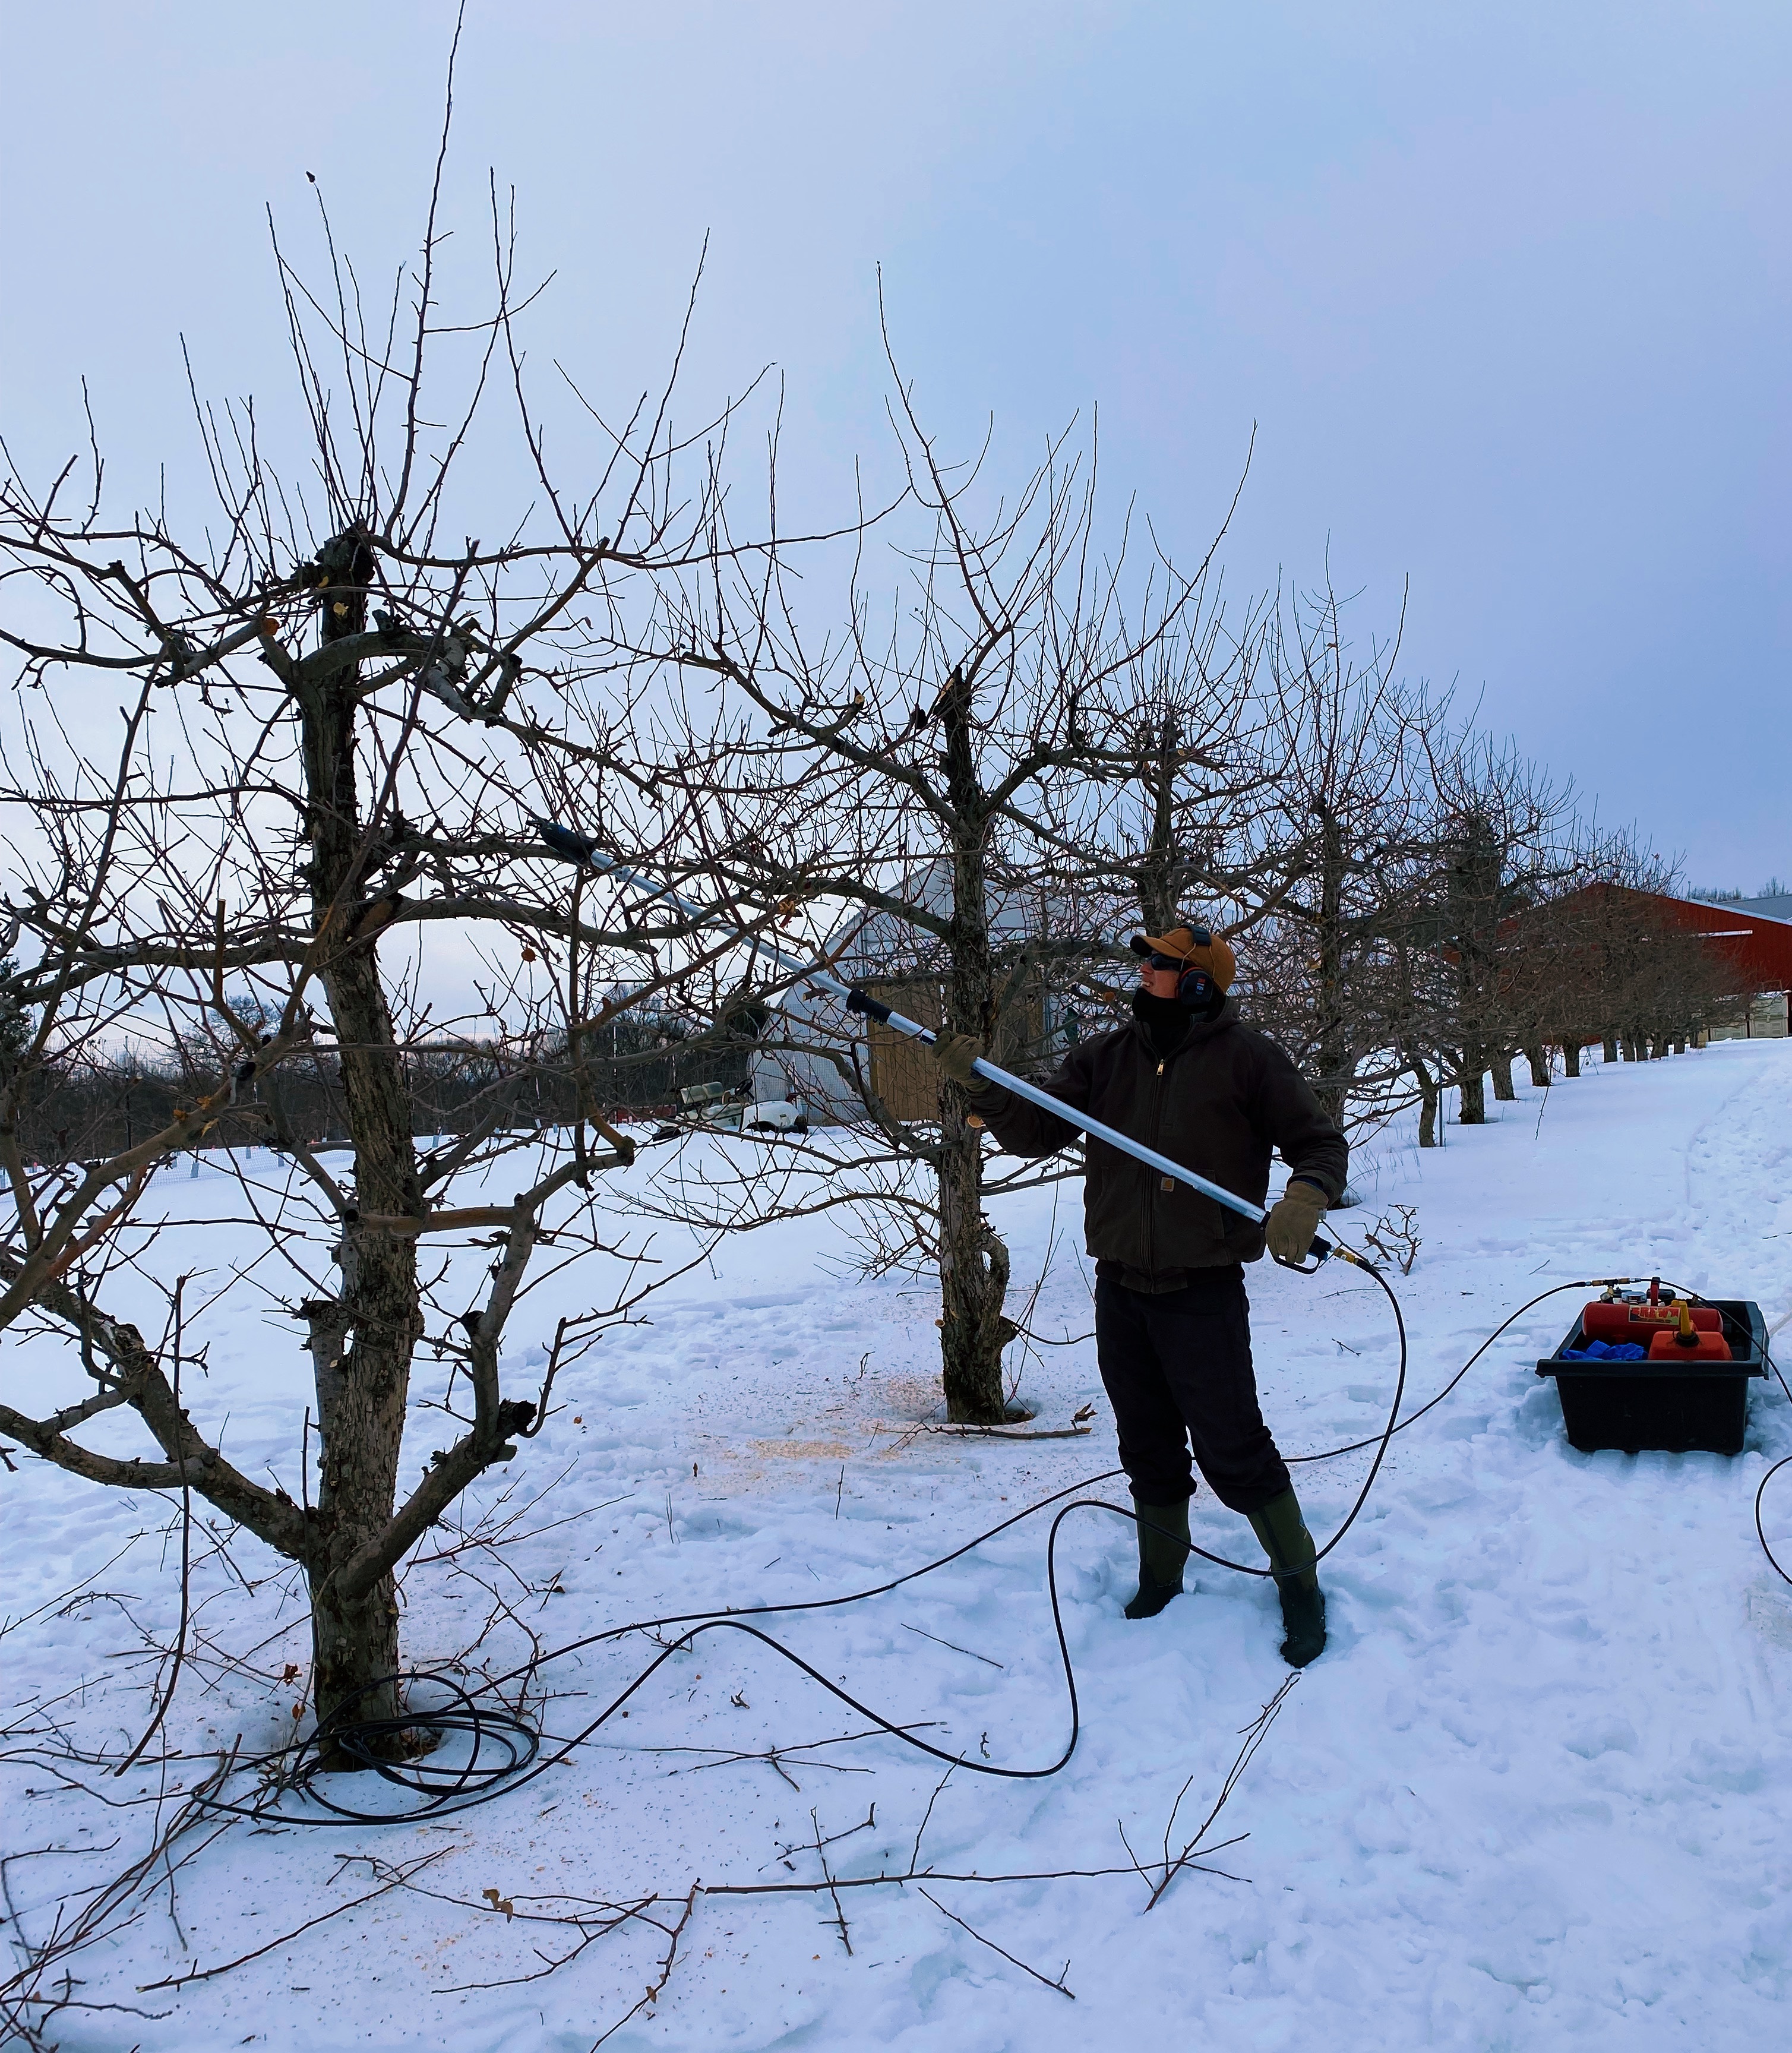 Winter at the Orchard